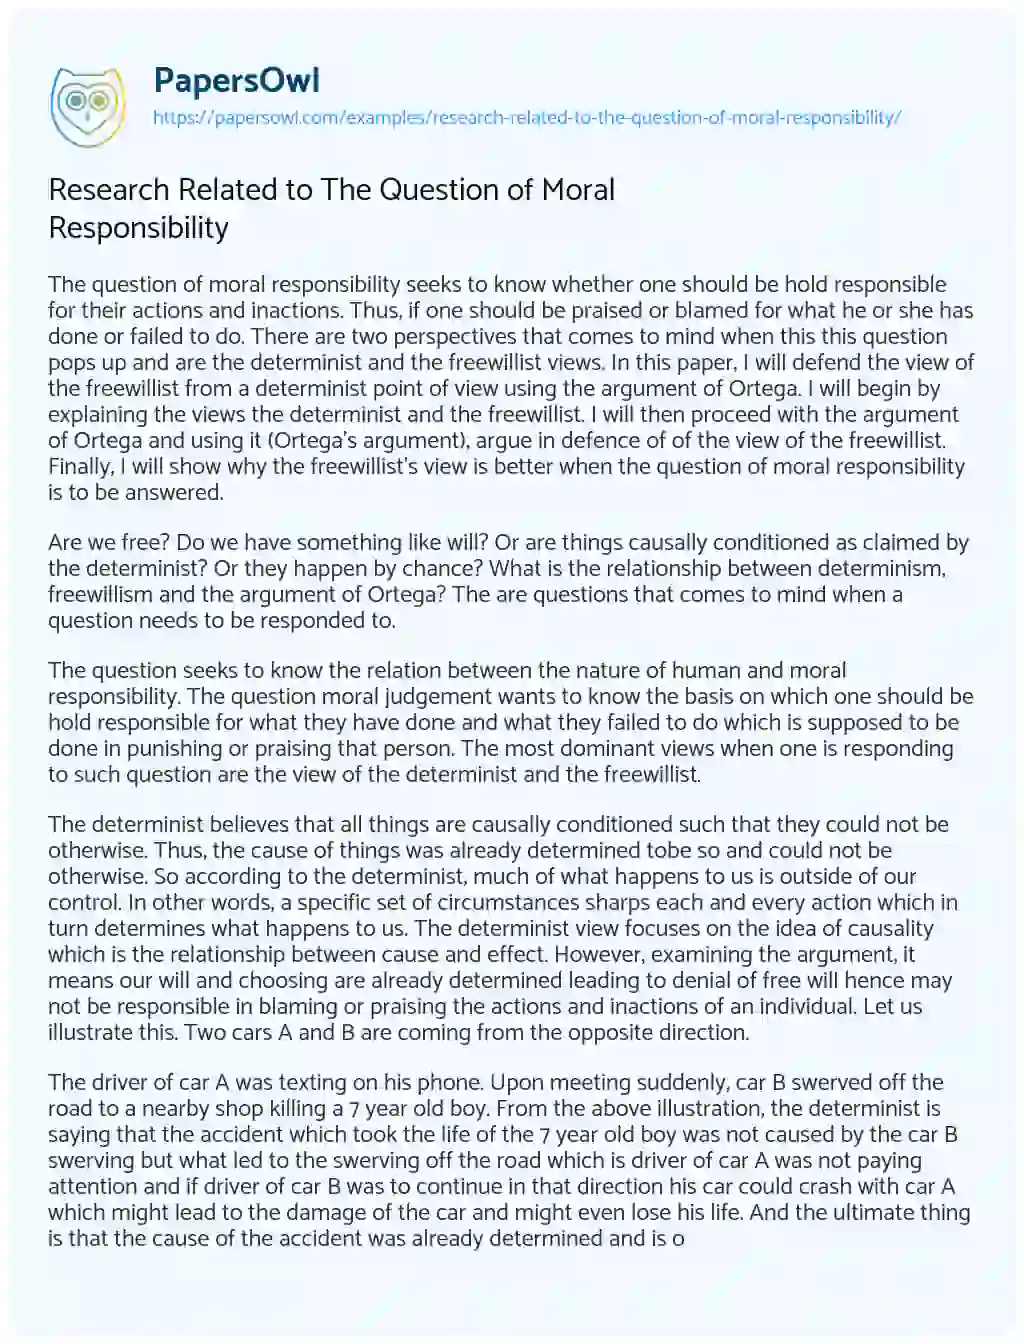 Essay on Research Related to the Question of Moral Responsibility